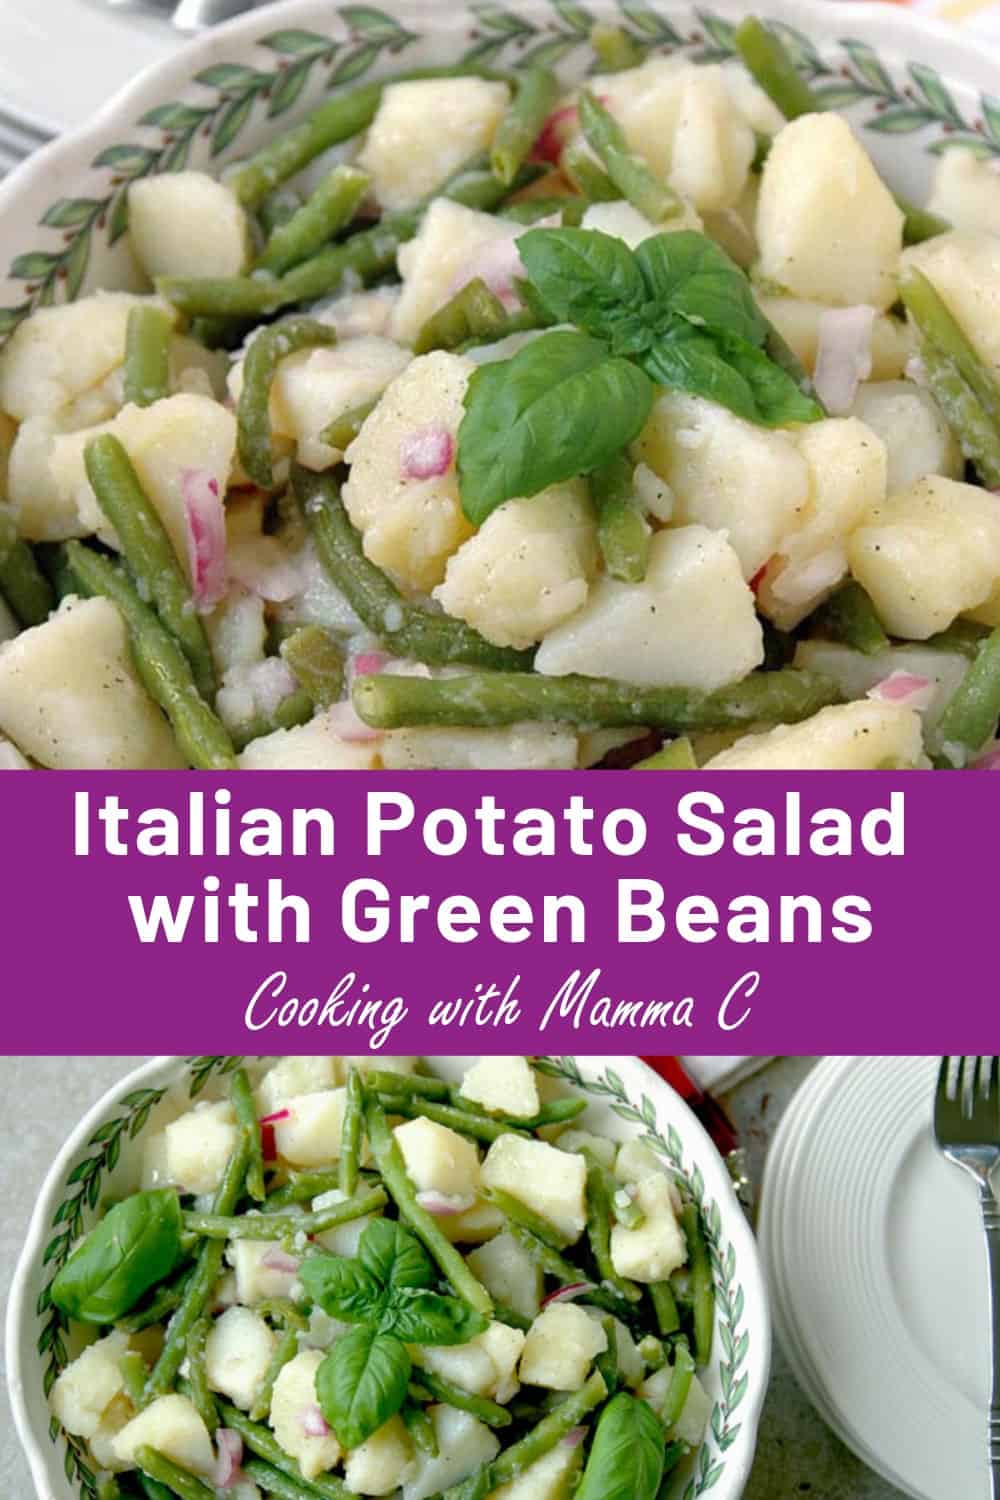 Italian Potato Salad with Green Beans - Cooking with Mamma C